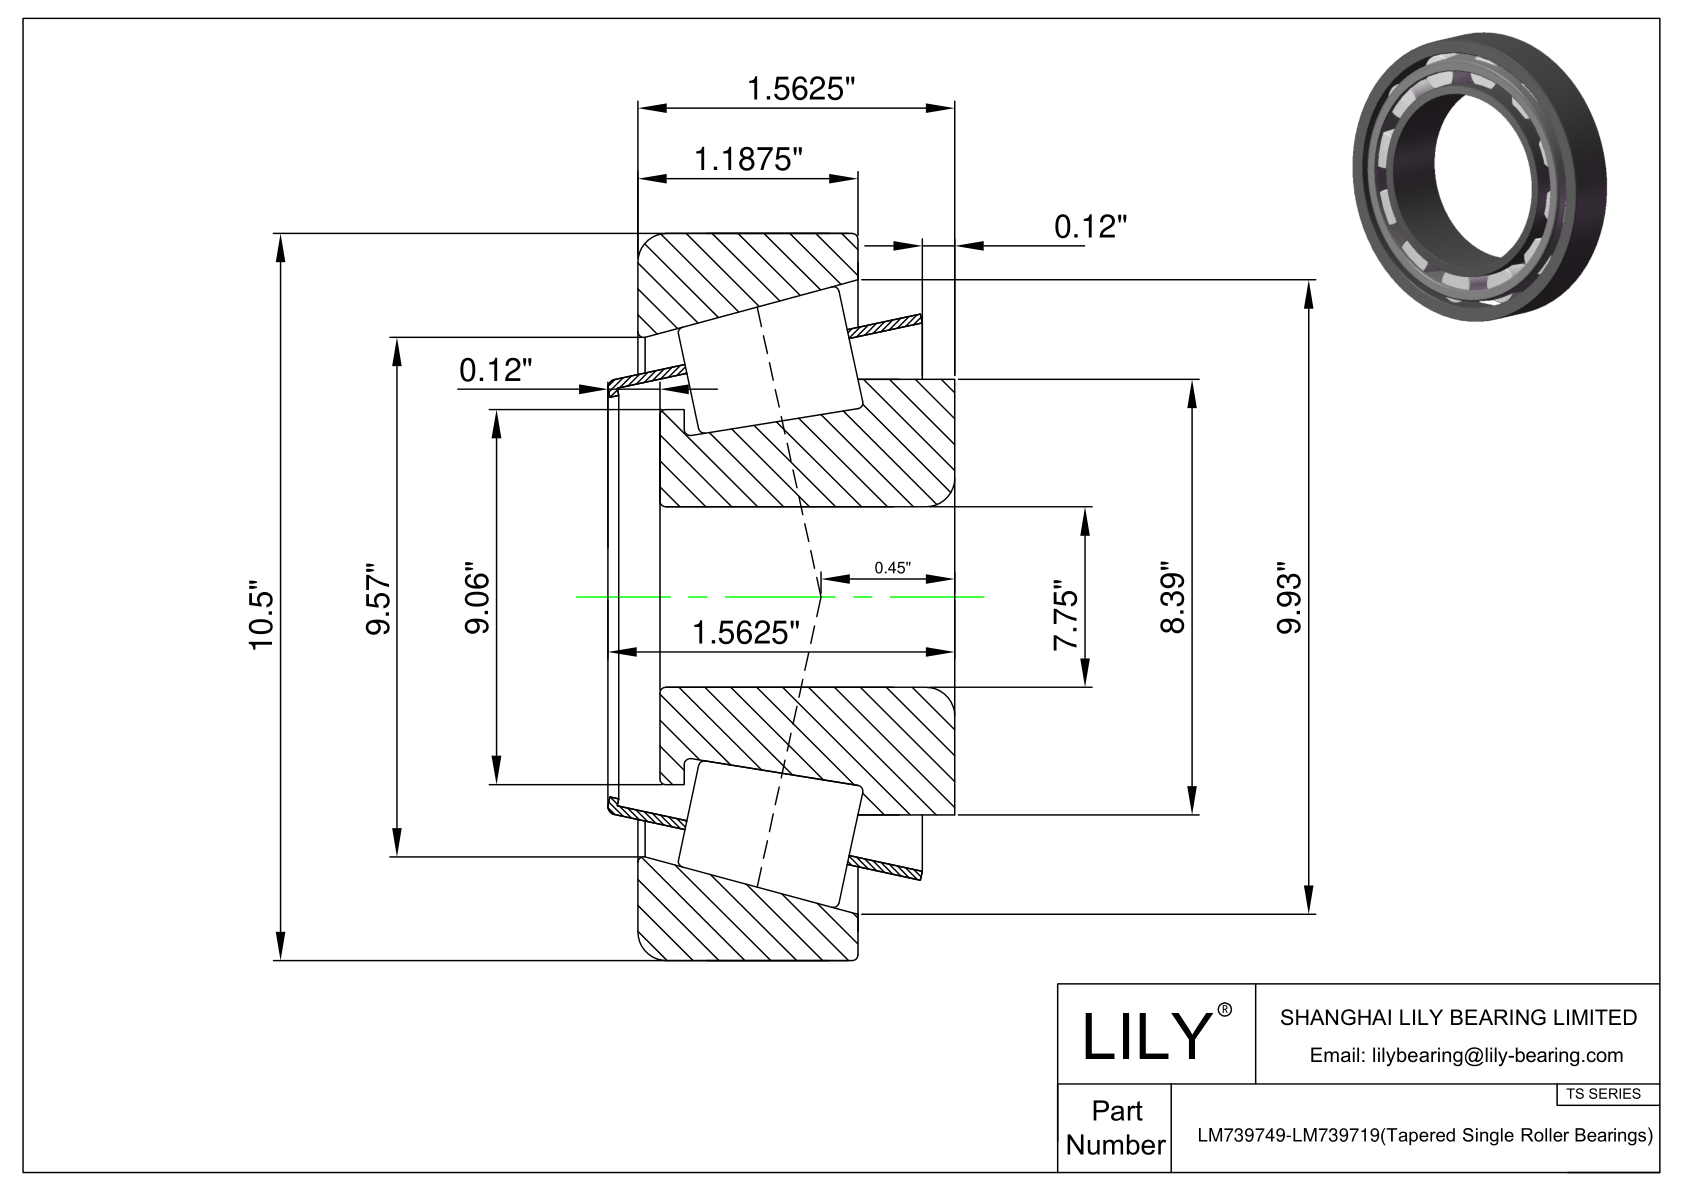 LM739749-LM739719 TS (Tapered Single Roller Bearings) (Imperial) cad drawing